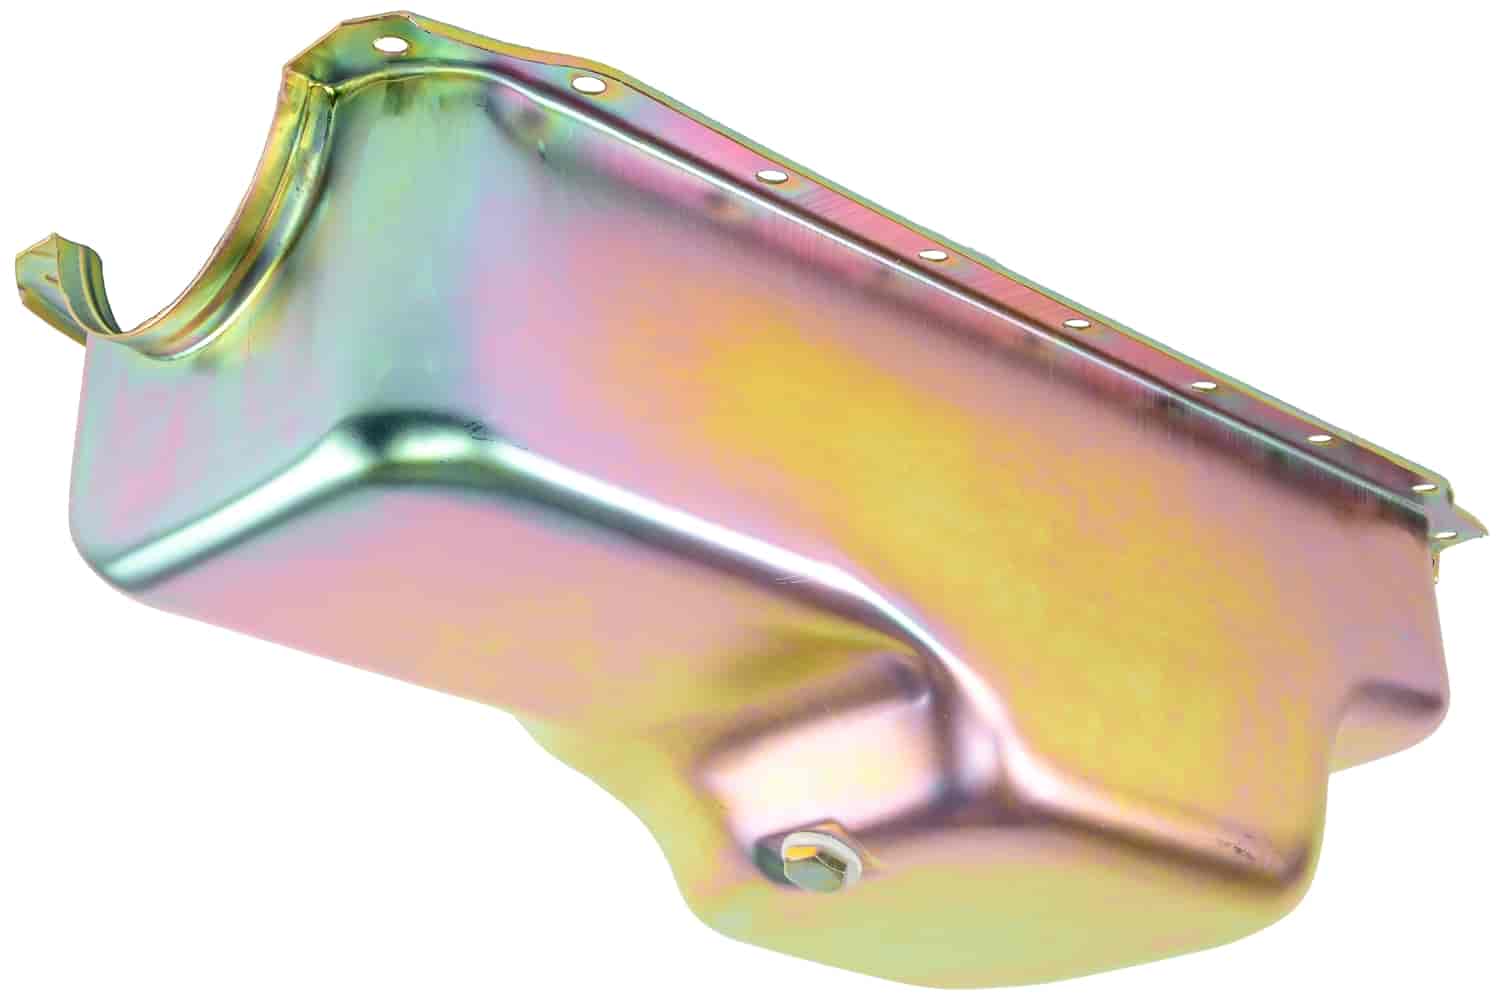 Stock-Style Replacement Oil Pan for 1972-1989 Small Block Chrysler 360 [Gold Zinc]